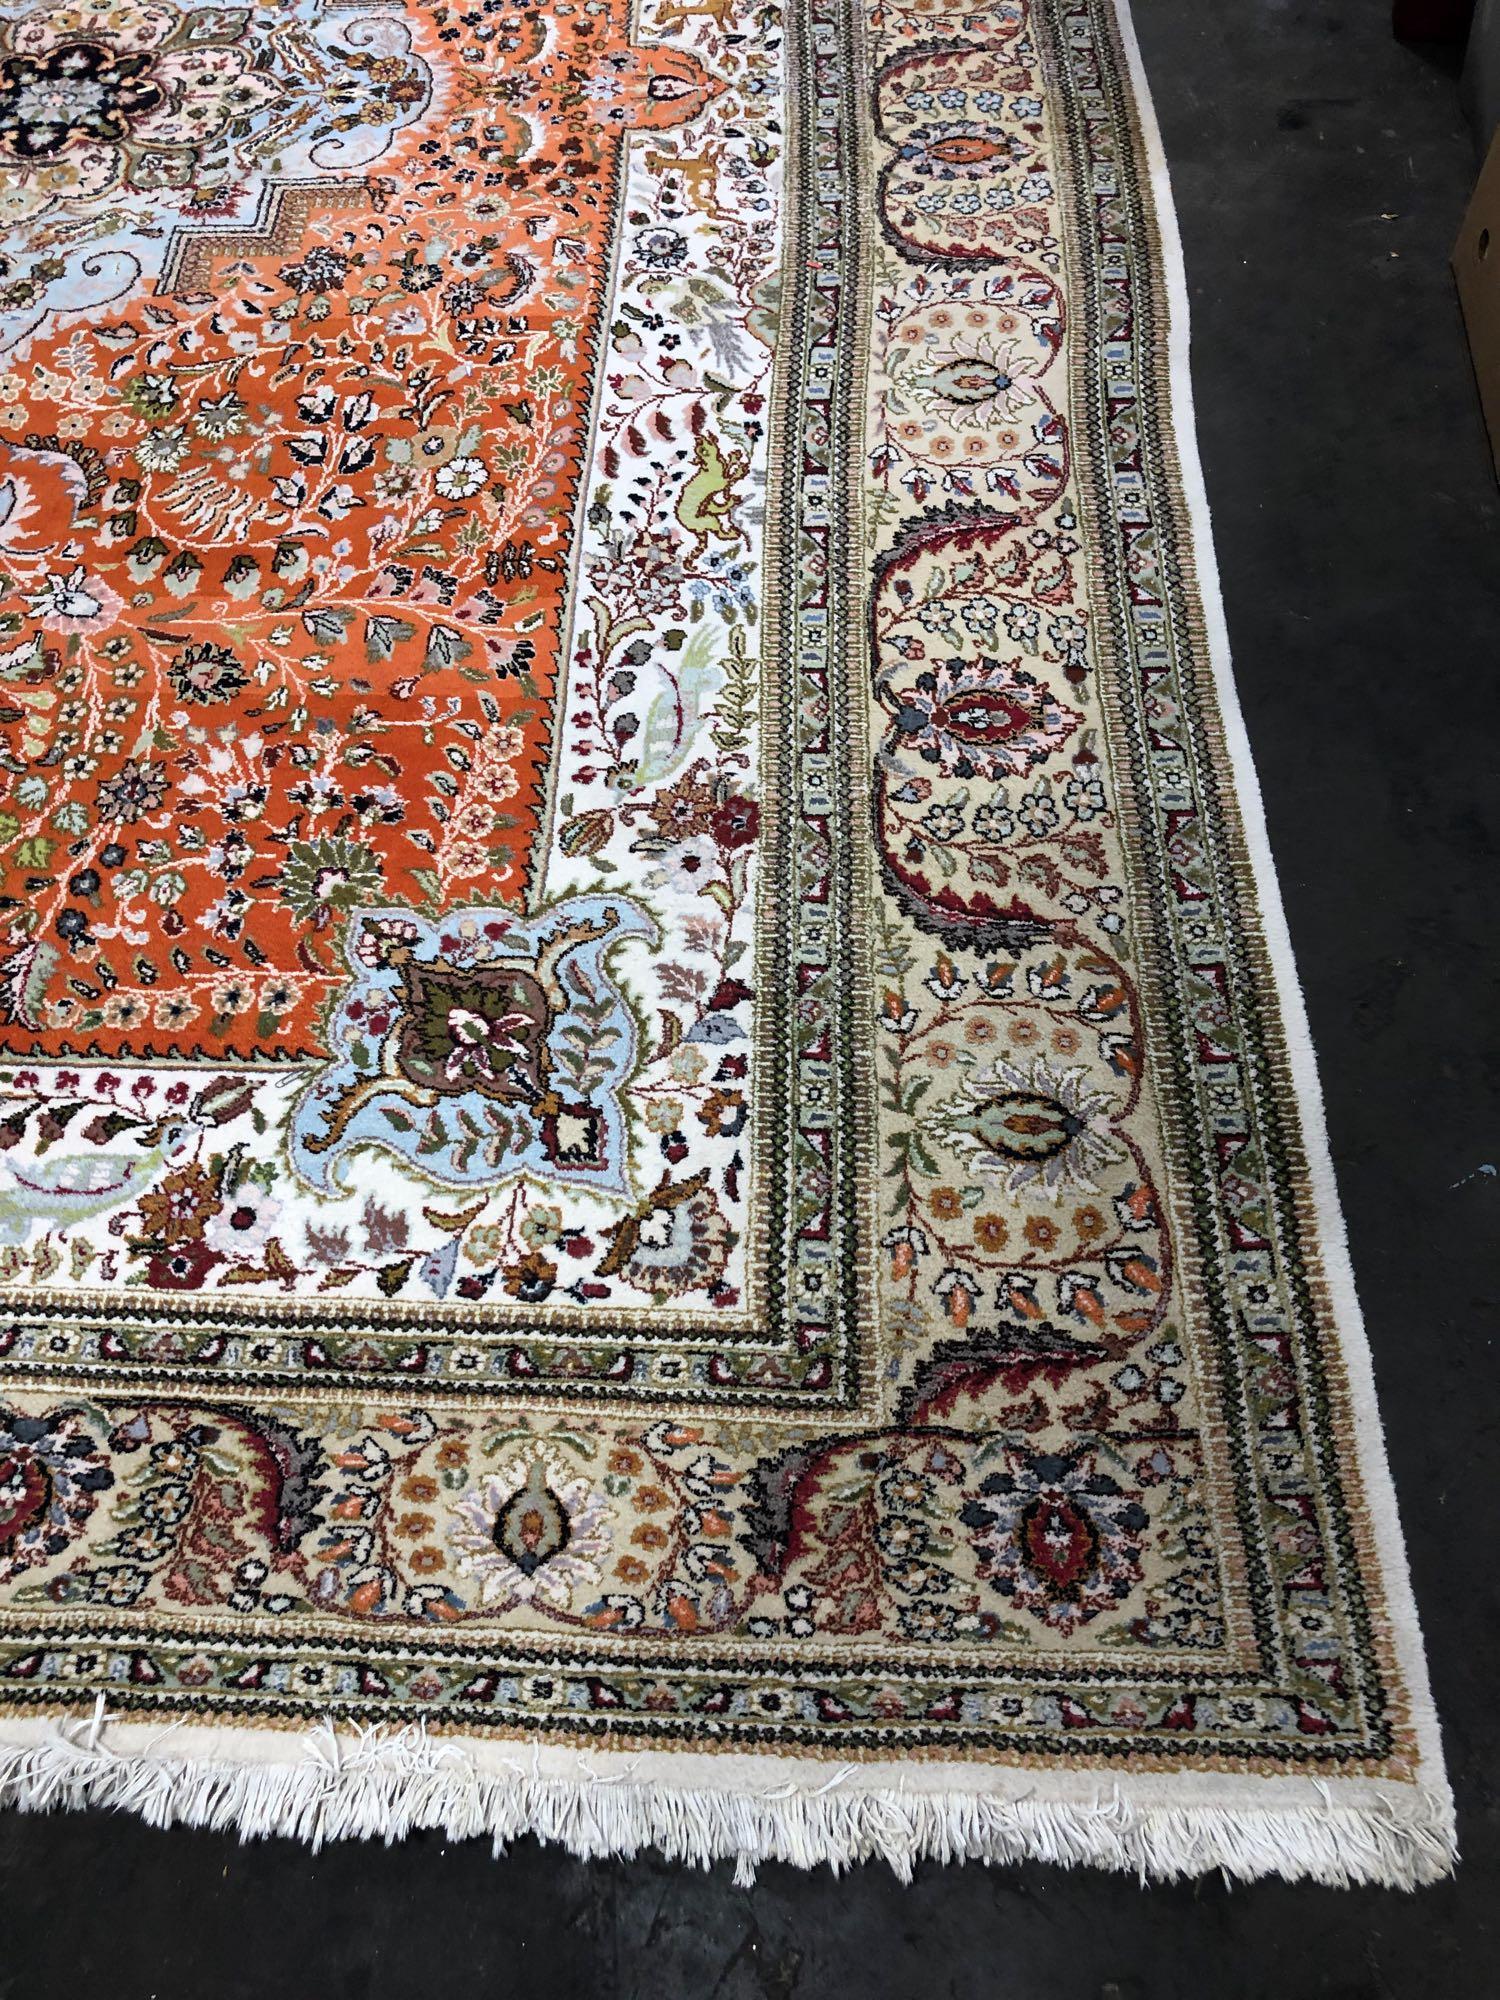 173" x 117" Handcrafted Persian Rug